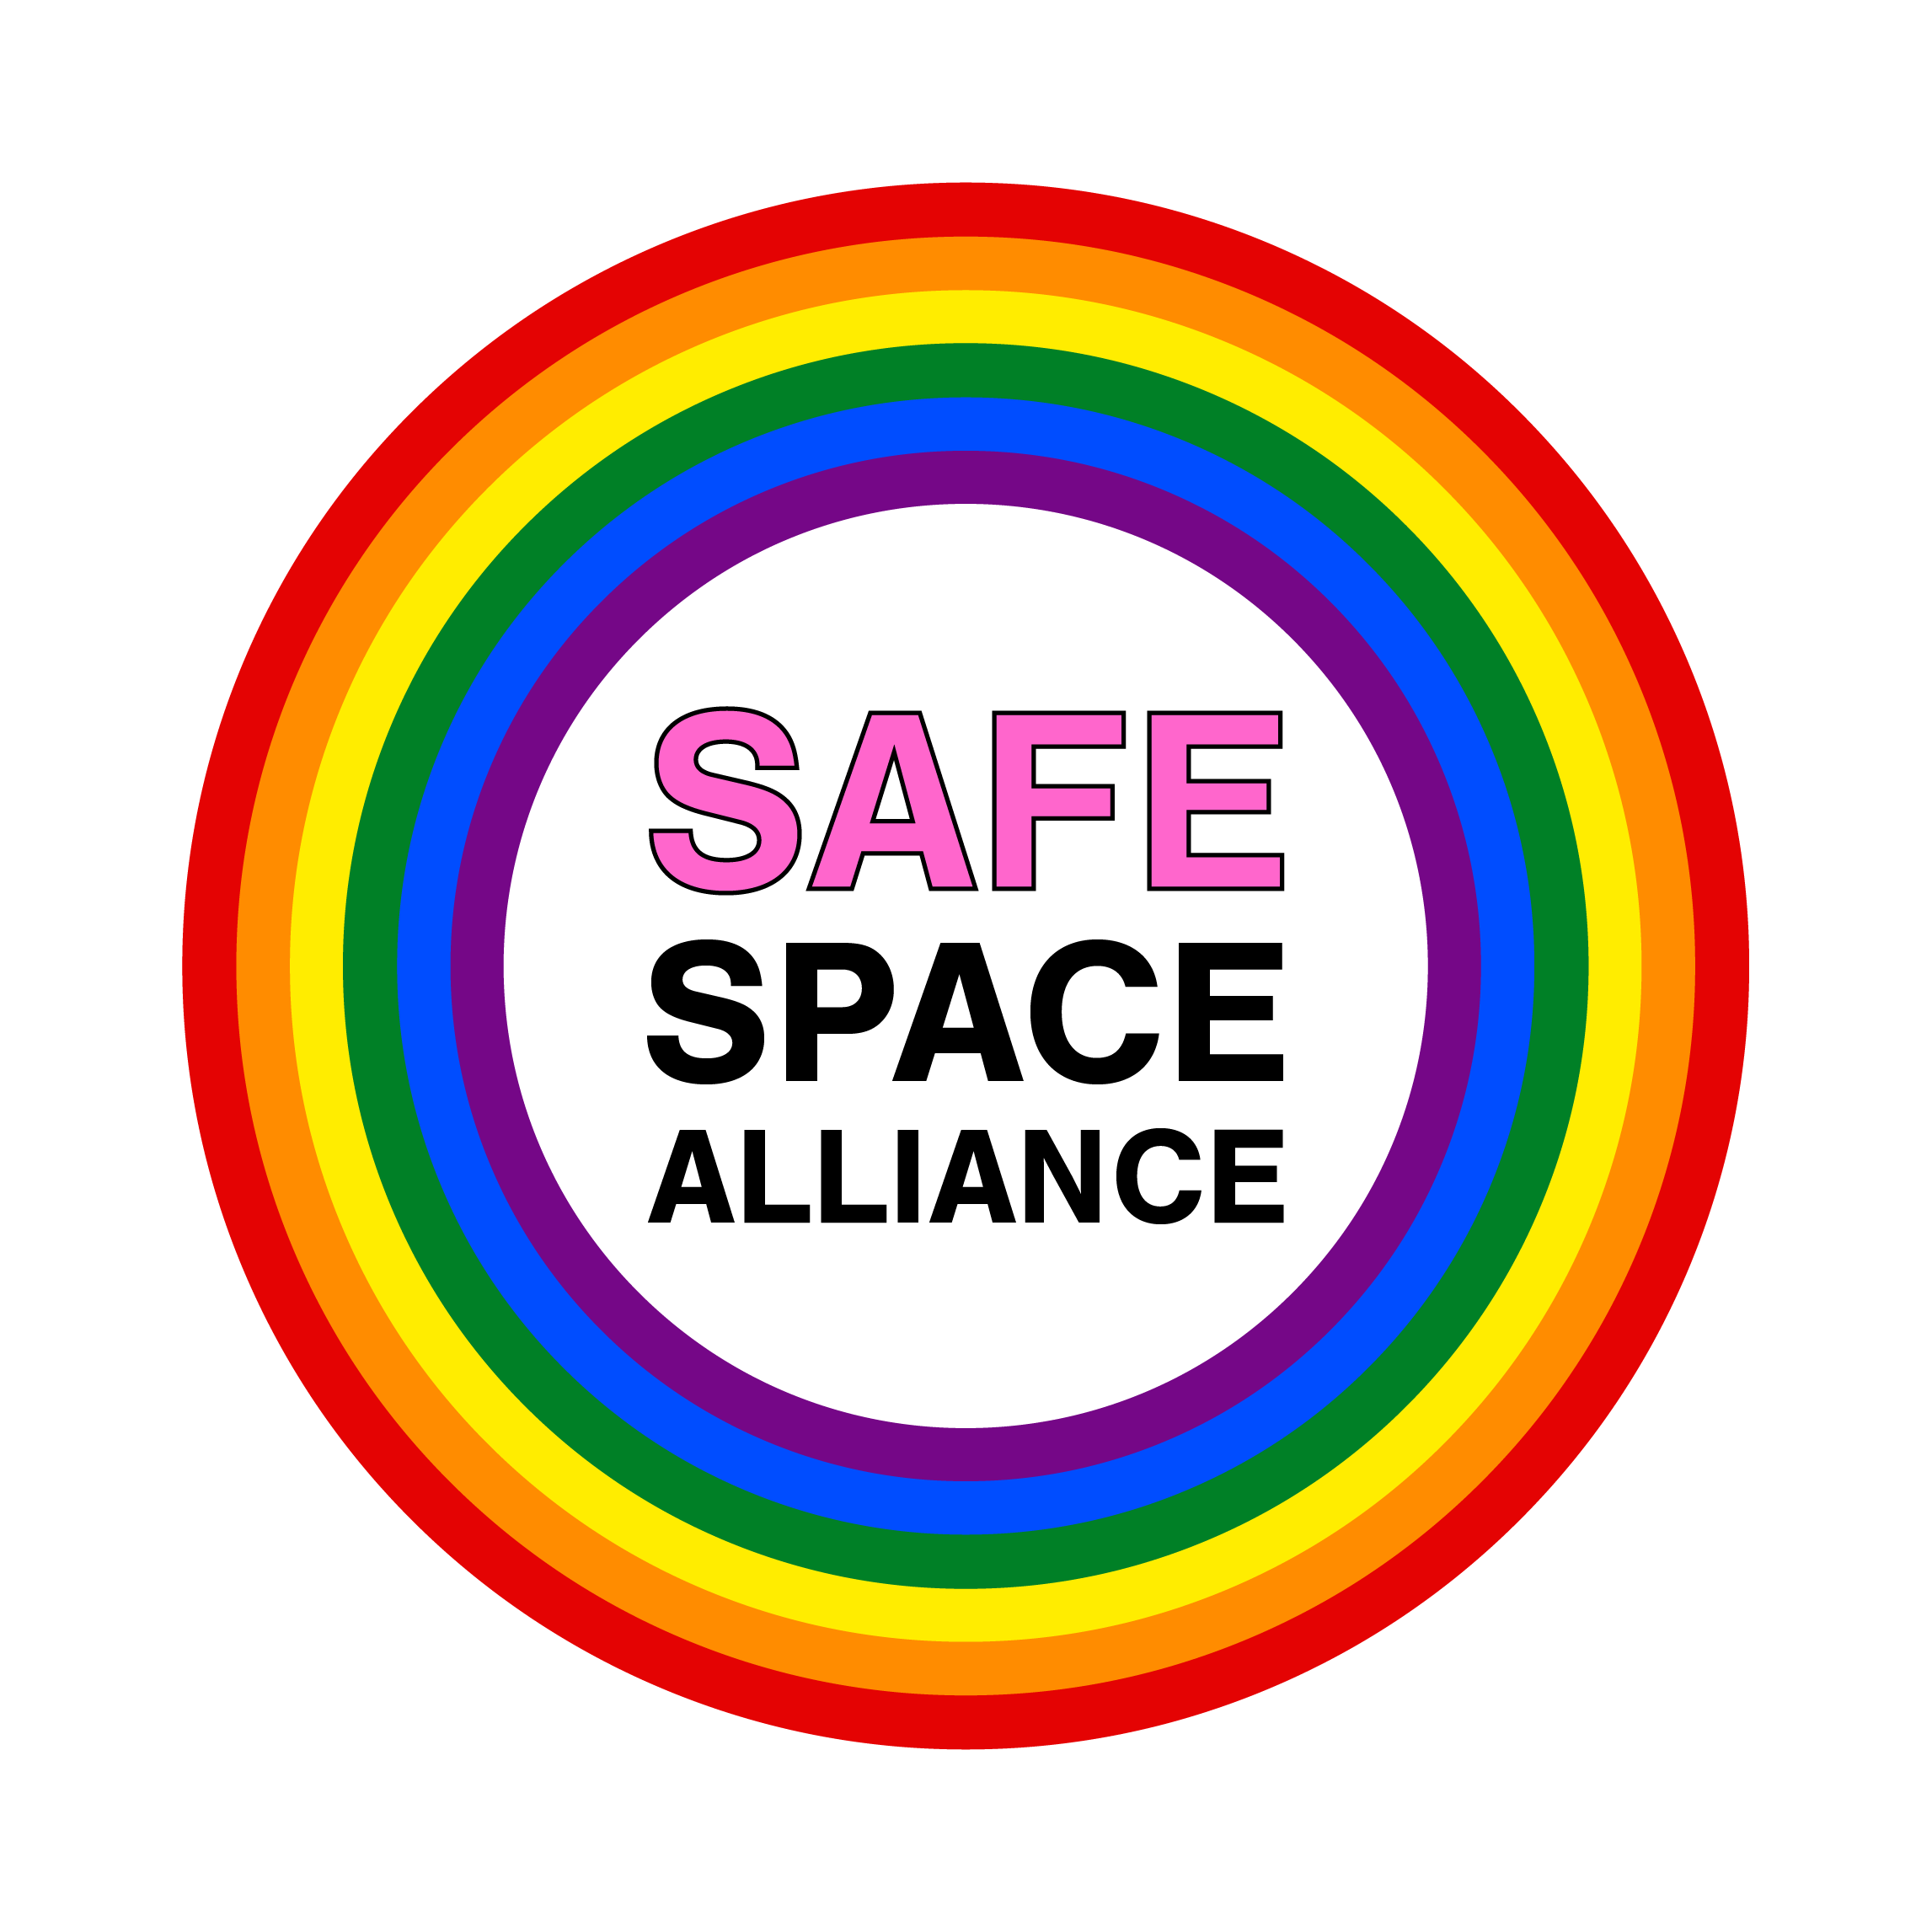 We are a Safe Space